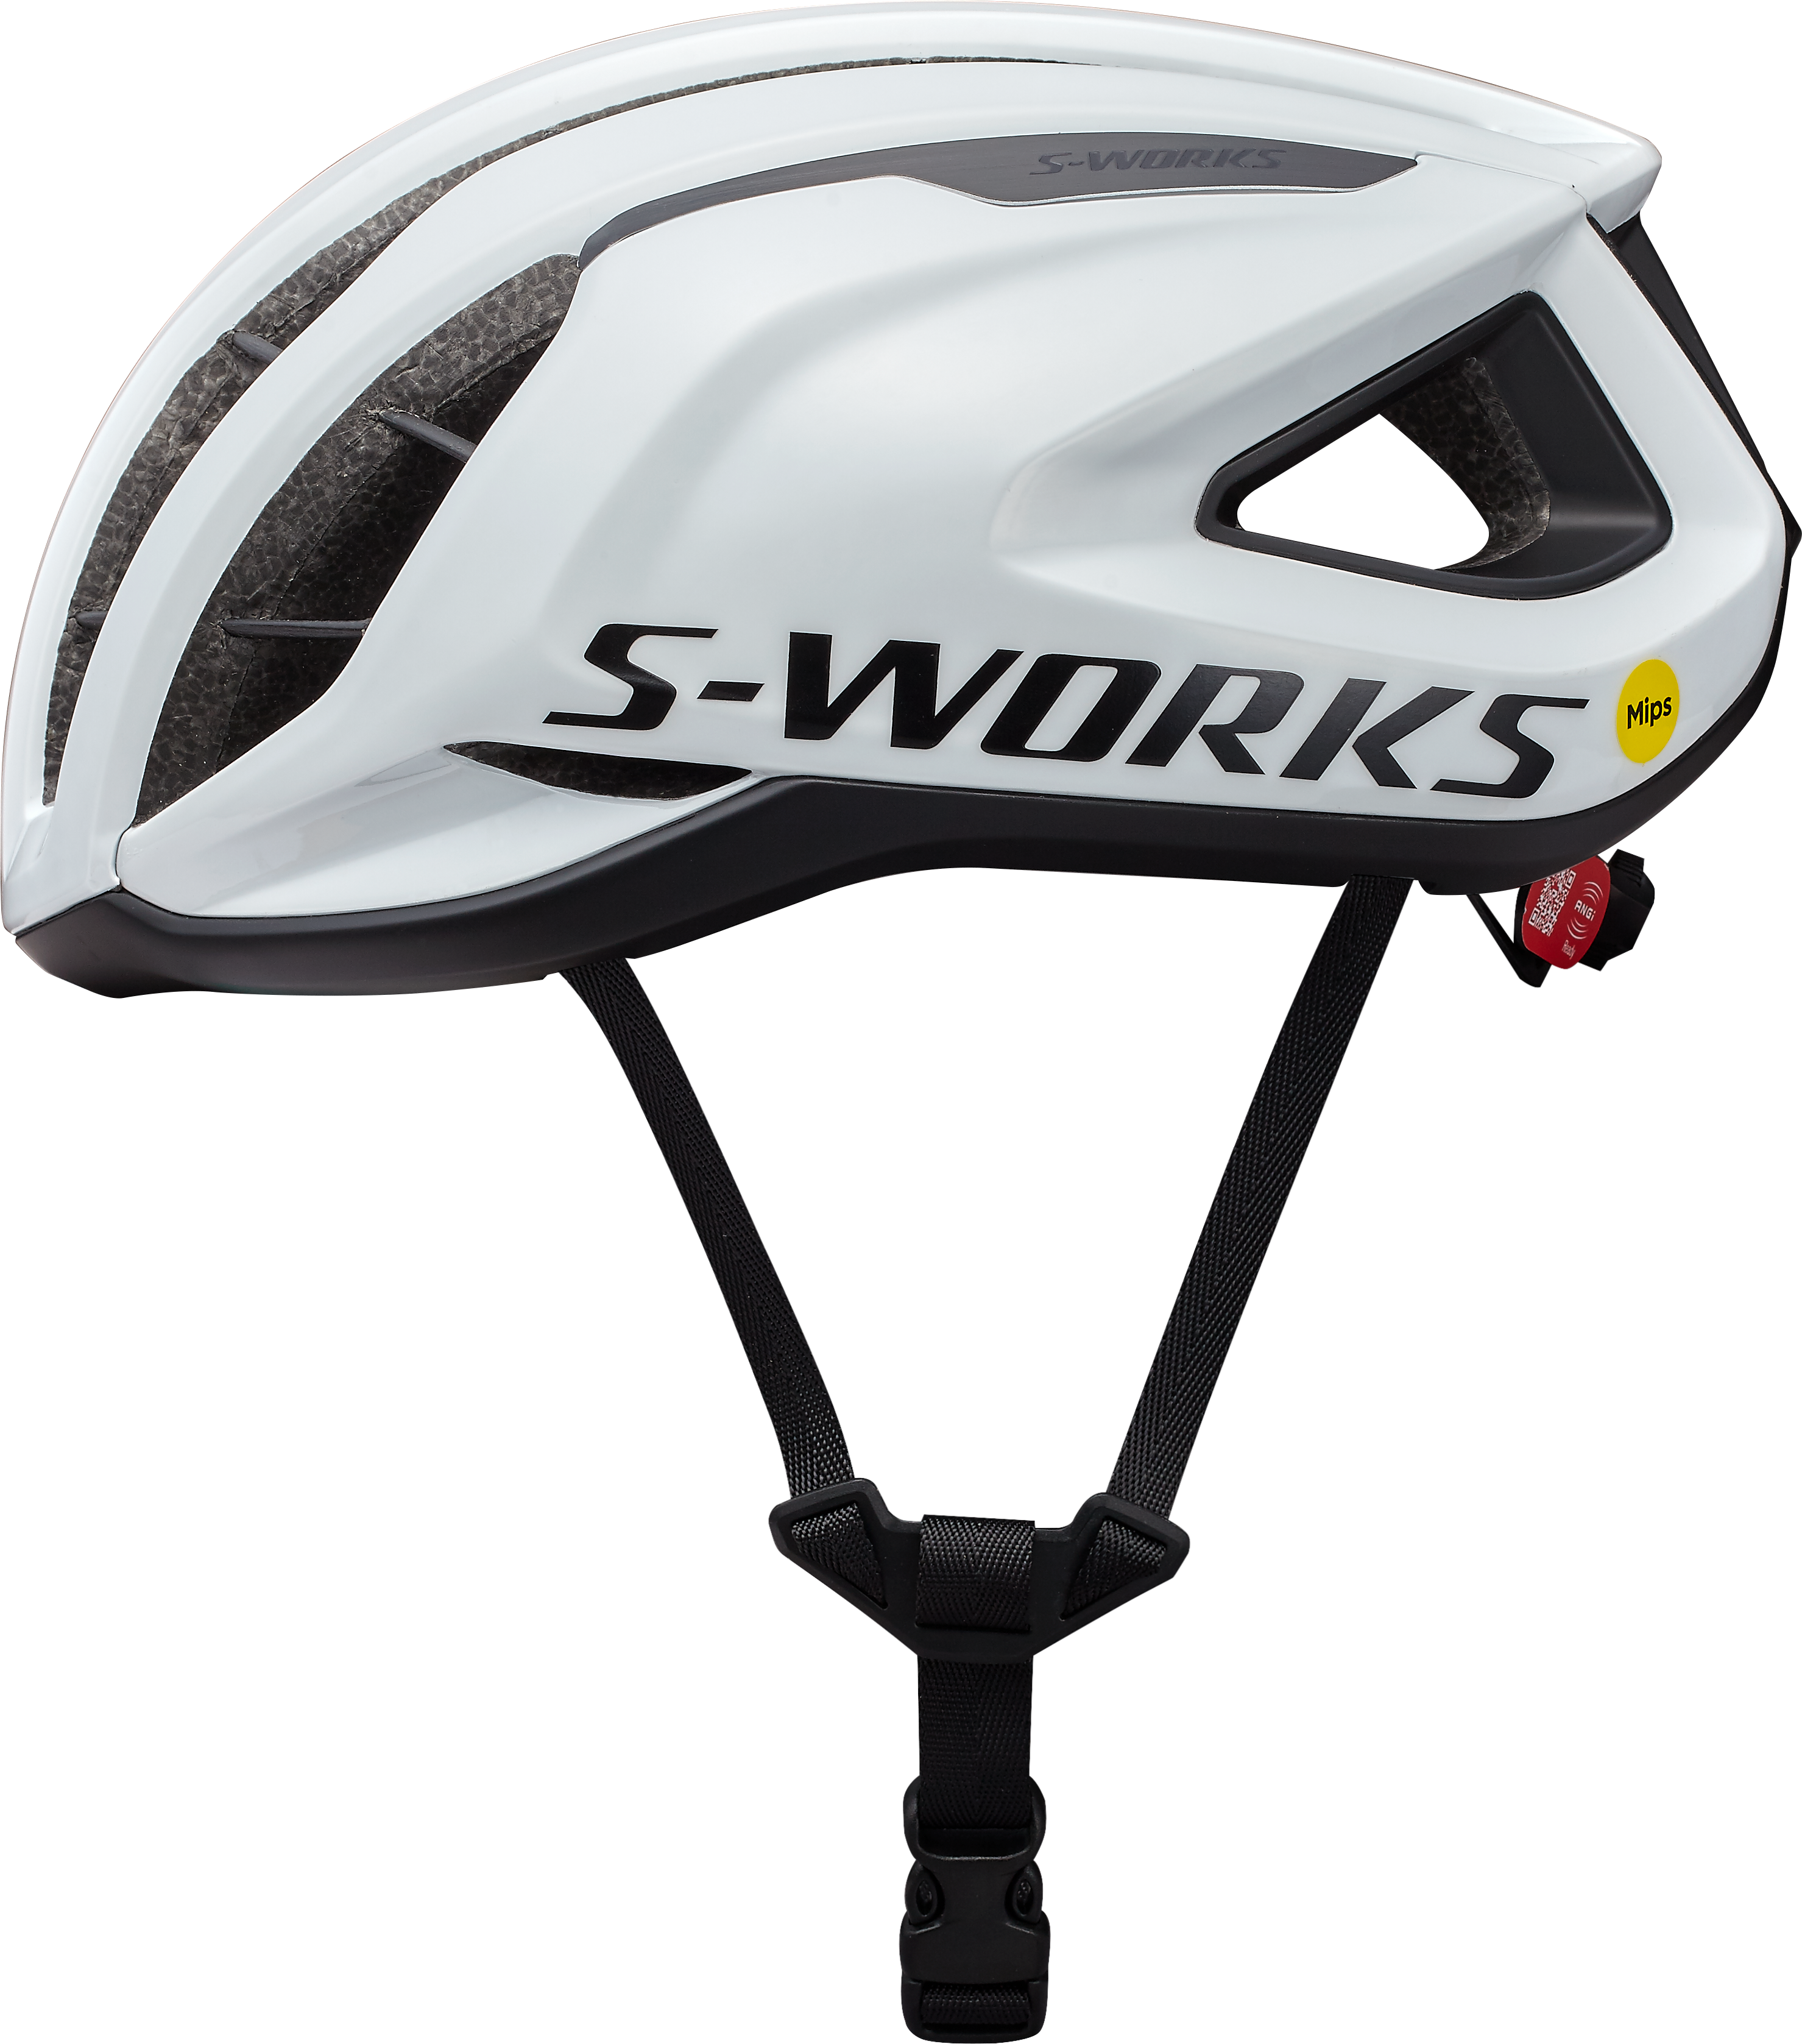 S-WORKSS-WORKS PREVAIL II HLMT ANGI MIPS CE